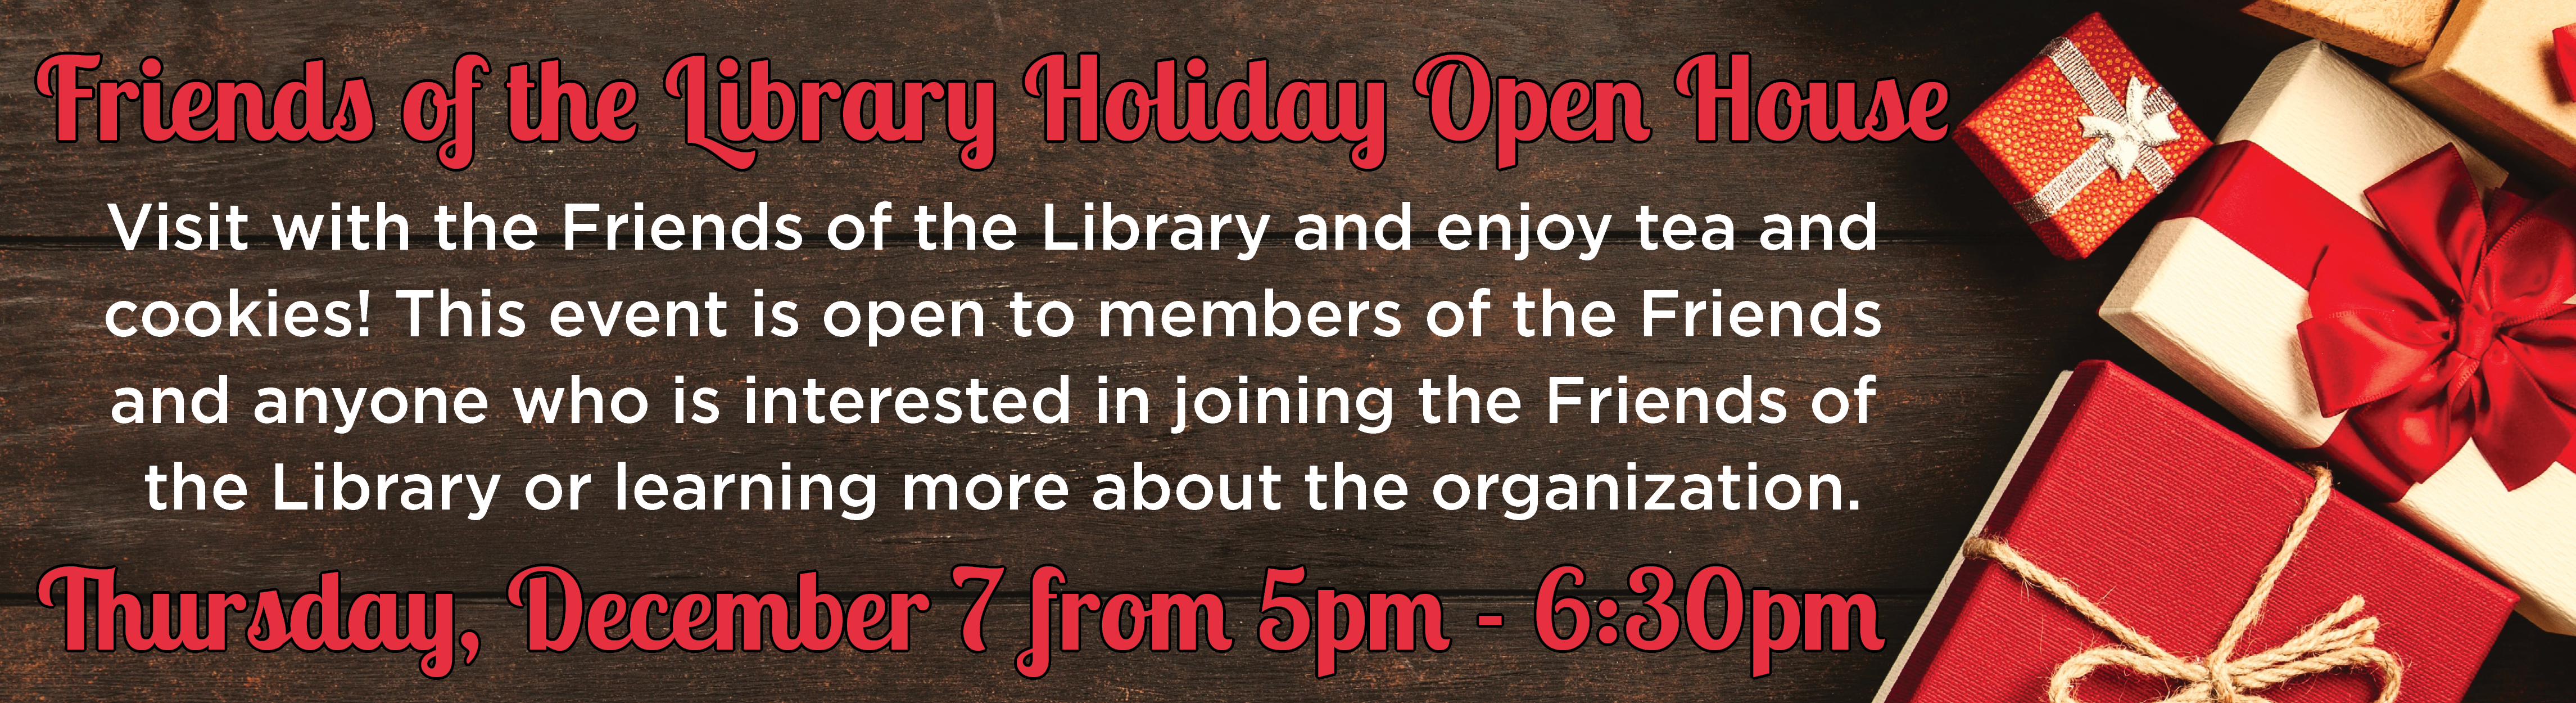 Friends of the Library Holiday Open House